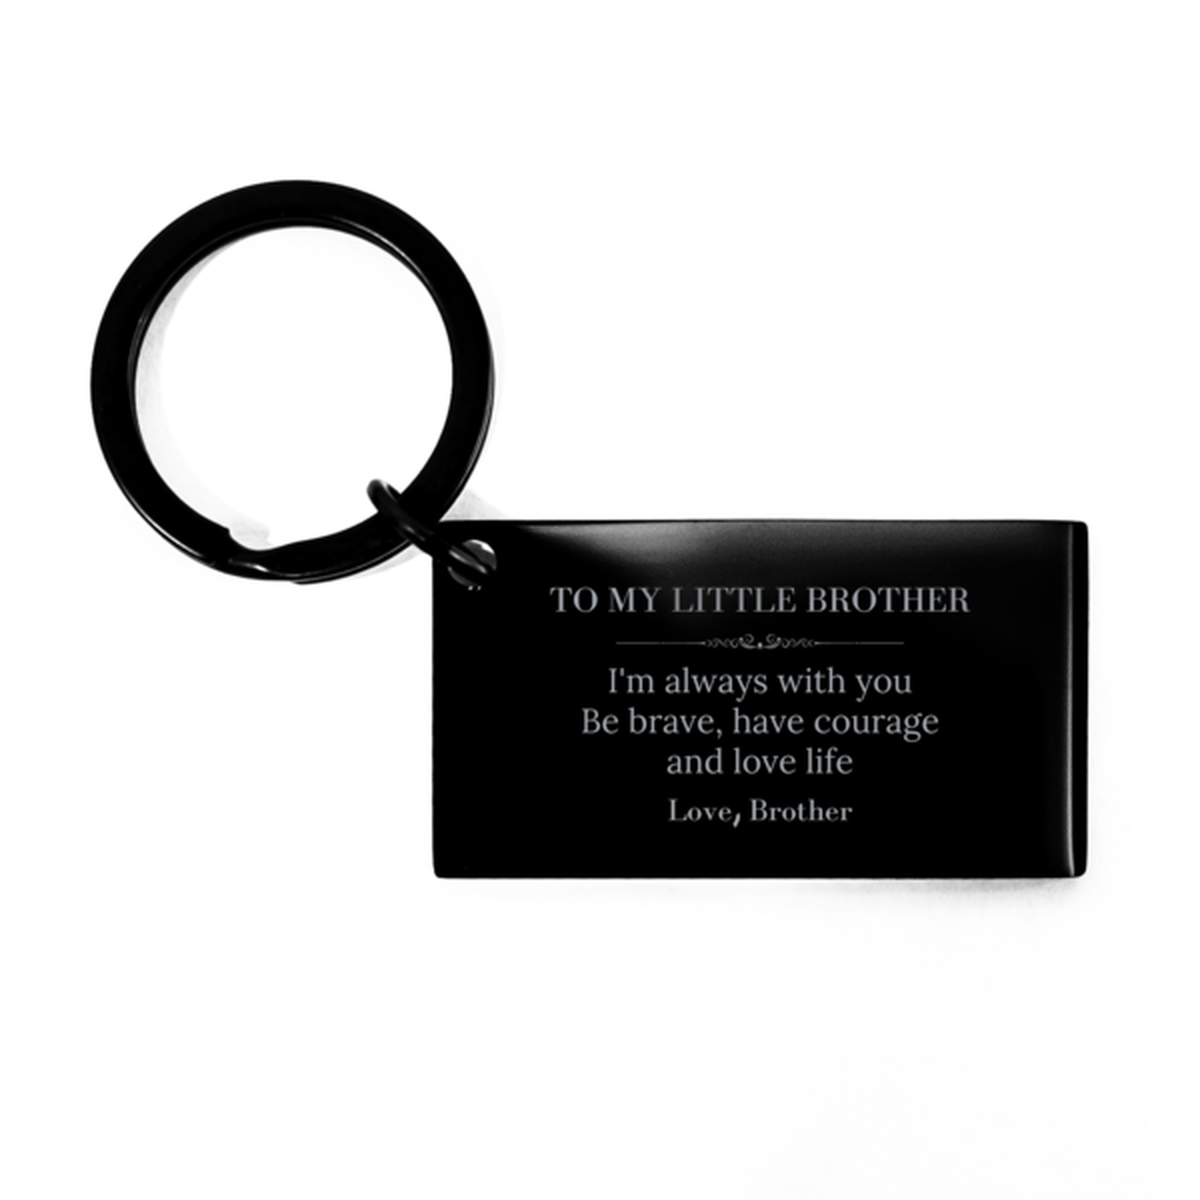 To My Little Brother Gifts from Brother, Unique Keychain Inspirational Christmas Birthday Graduation Gifts for Little Brother I'm always with you. Be brave, have courage and love life. Love, Brother